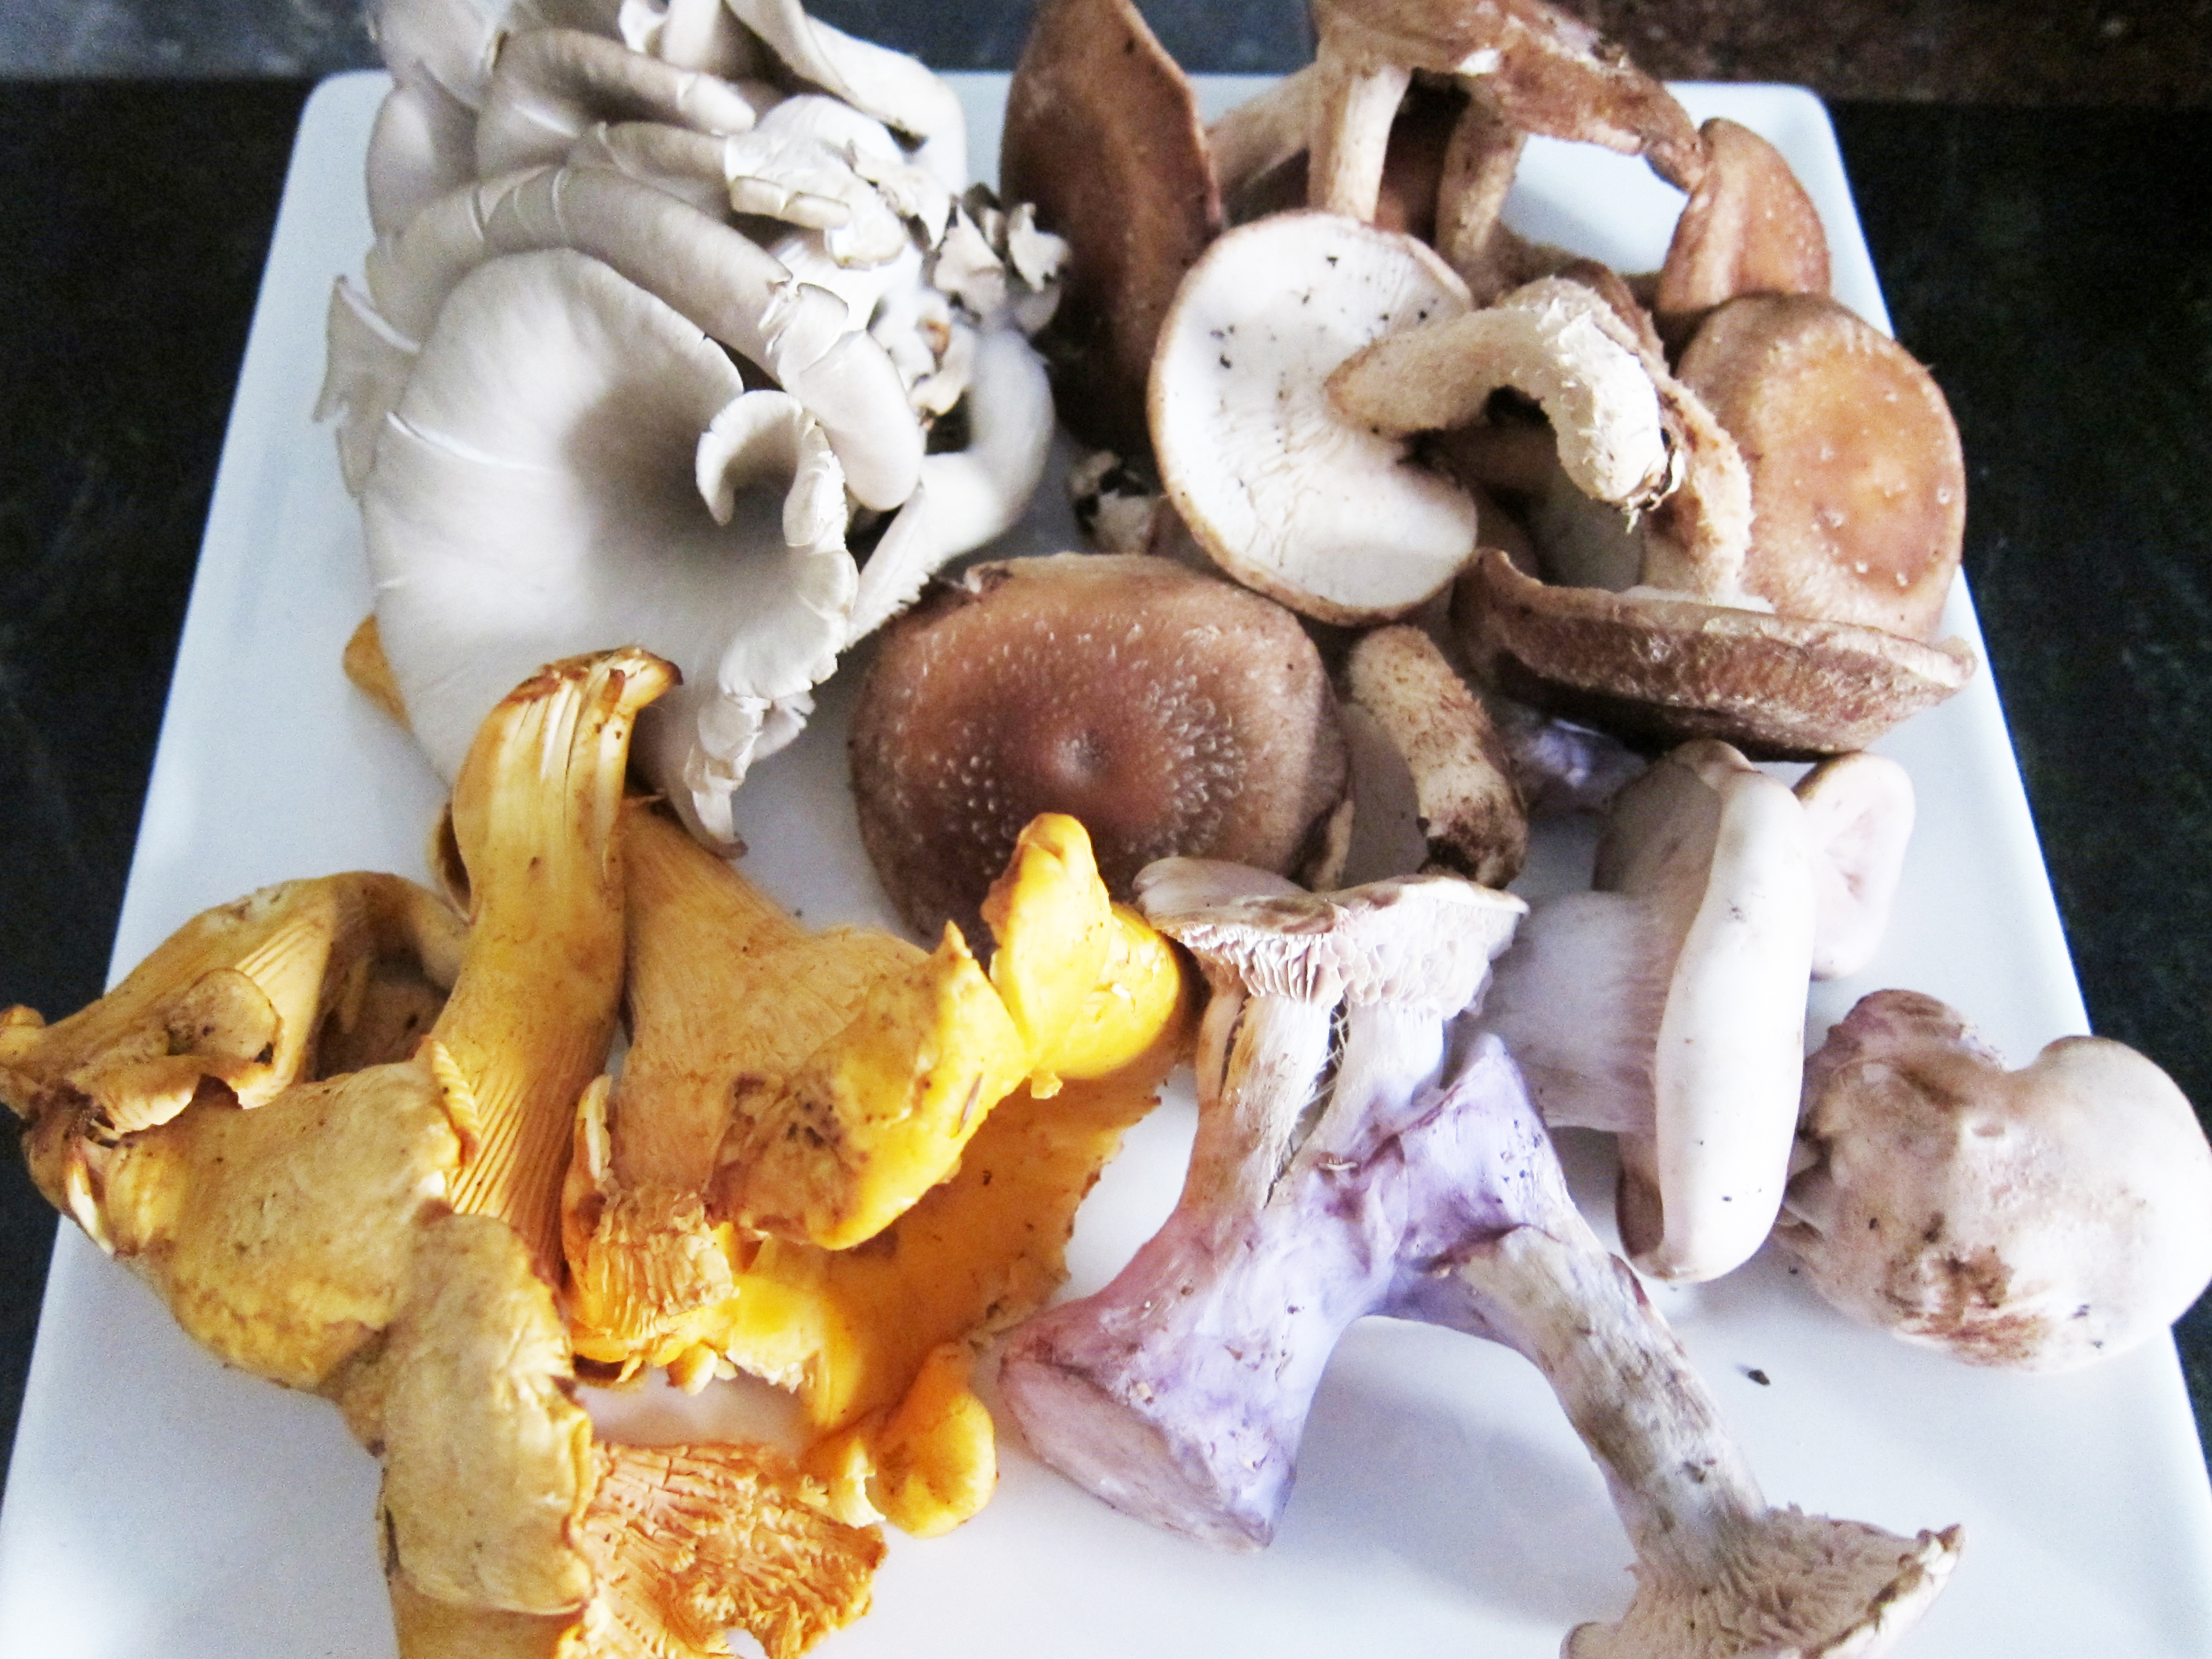 Several different mushrooms in different shapes, blue, orange, white, and brown with some dirt sticking to the ends.